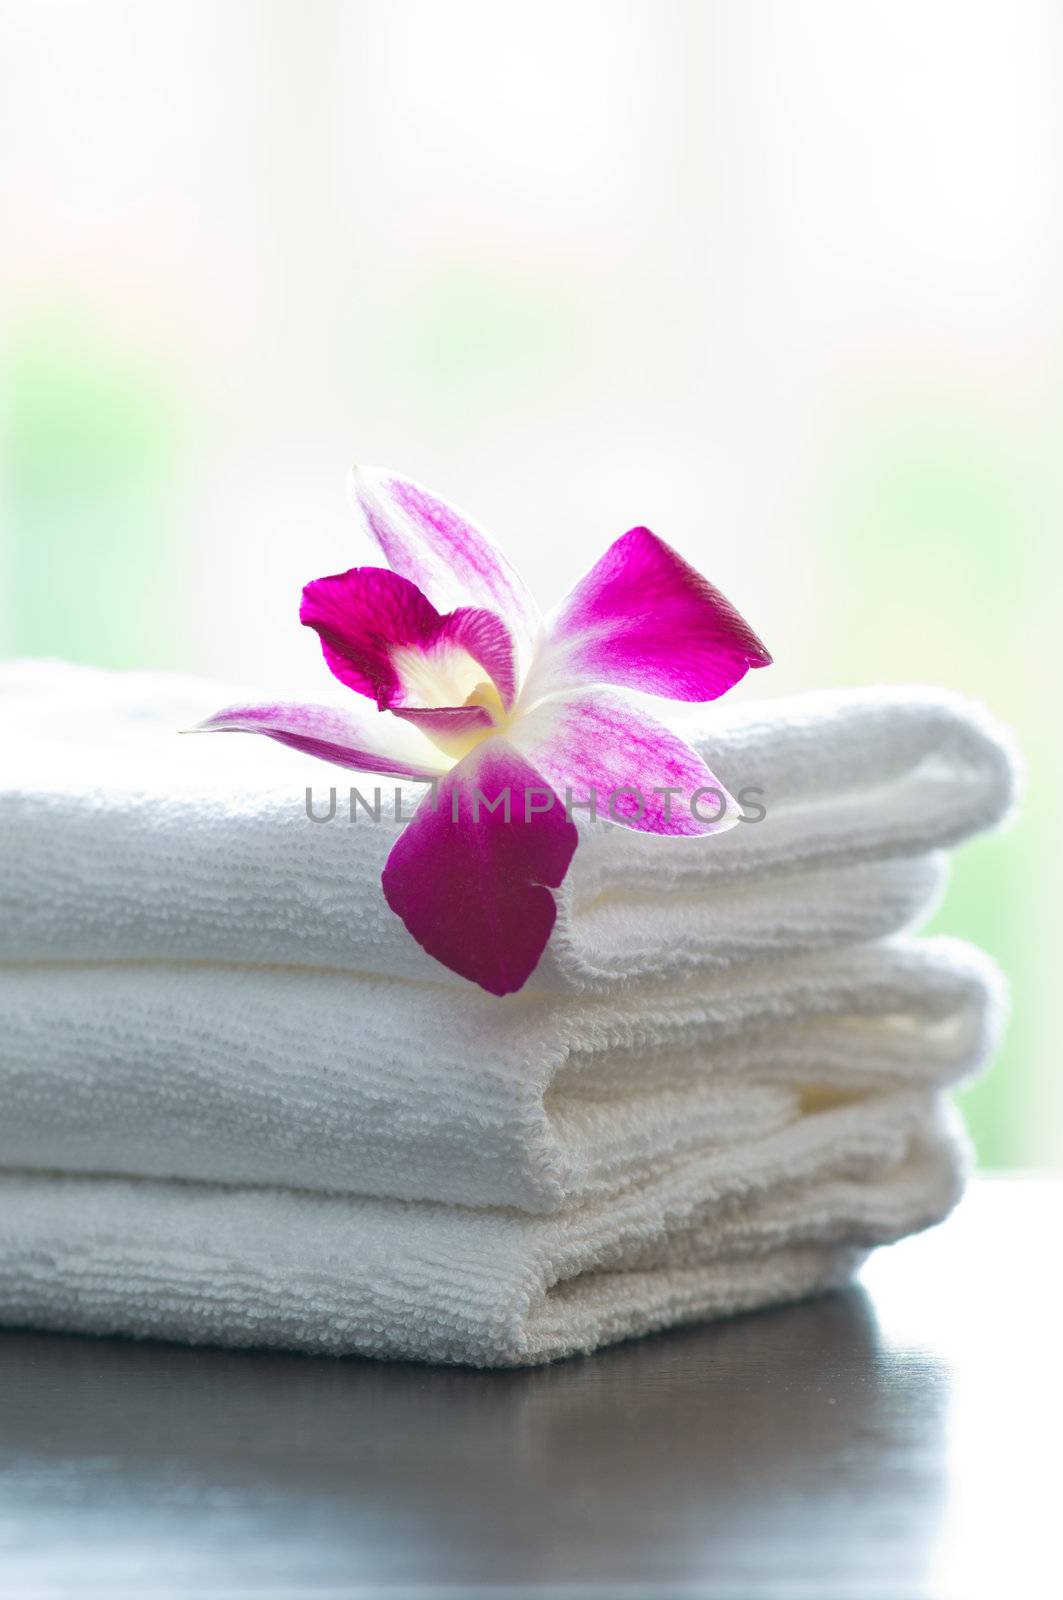 Spa towels and orchid flowers in front of a bright background